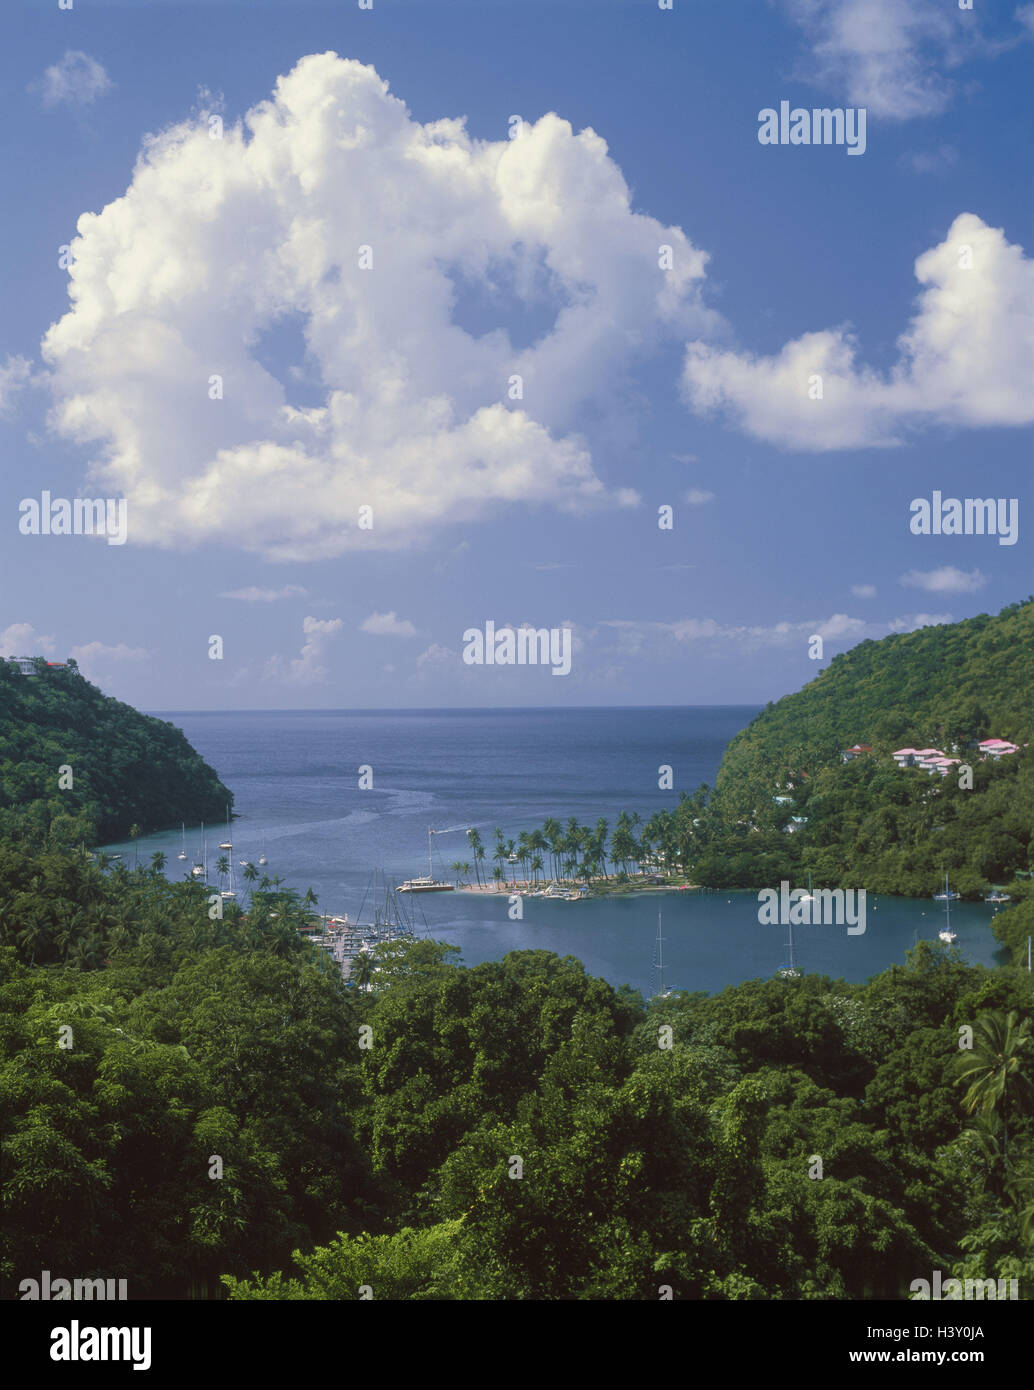 The Caribbean, the small Antilles, Saint Lucia, Marigot Bay, harbour, overview Central America, island state, British Winward islands, West-Indian islands, islands about the wind, island, Saint Lucia, coastal scenery, scenery, coast, sea, bay, harbour, sh Stock Photo